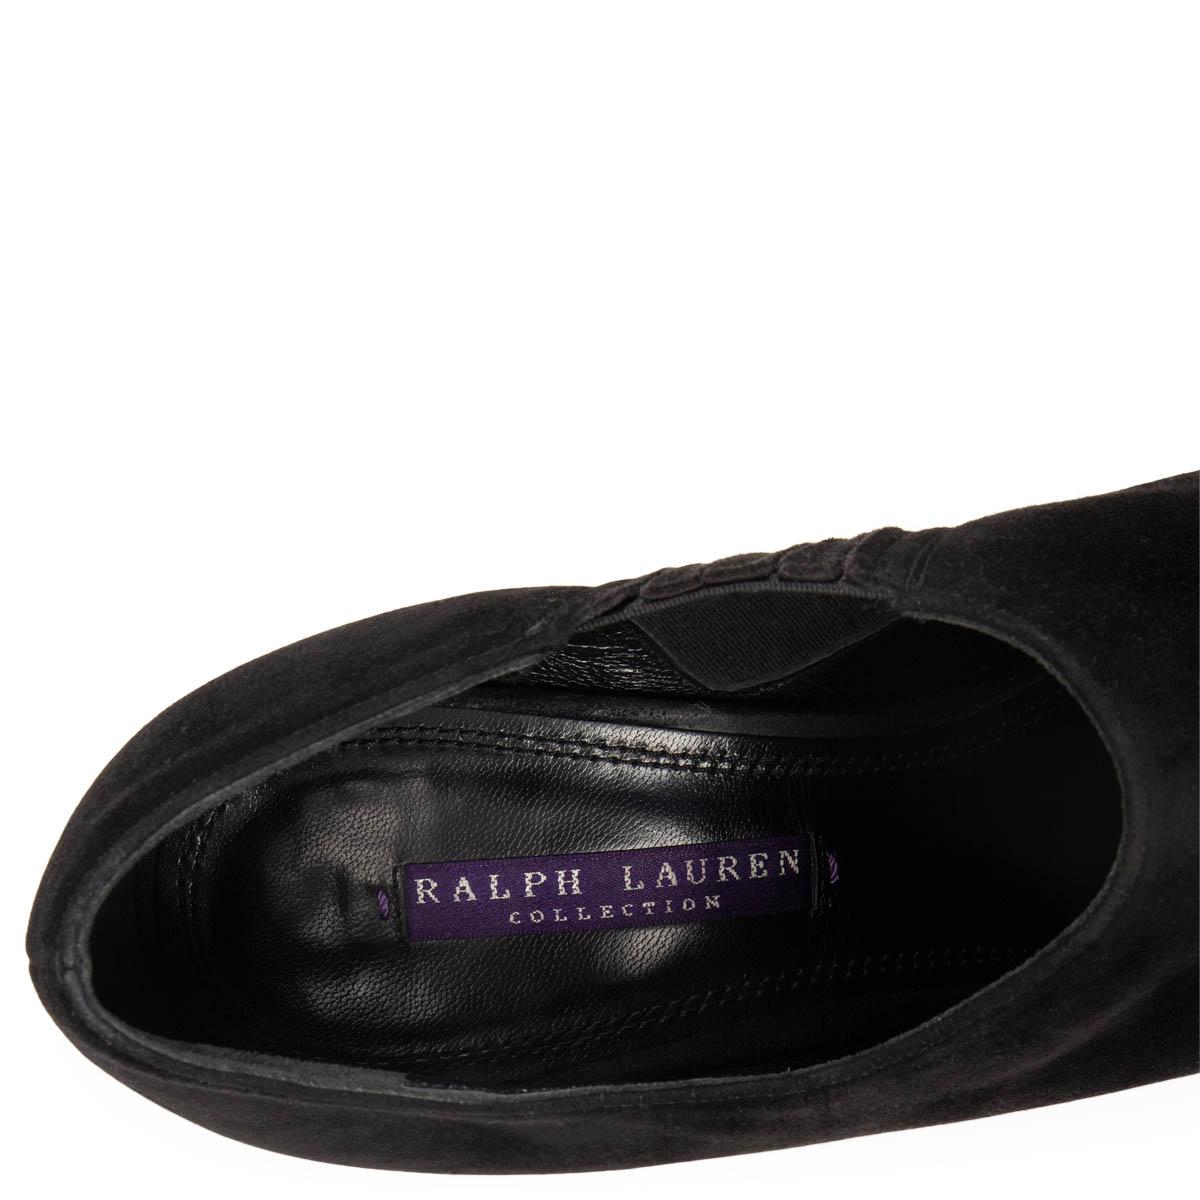 RALPH LAUREN black suede Ankle Boots Shoes 8.5 In Excellent Condition For Sale In Zürich, CH